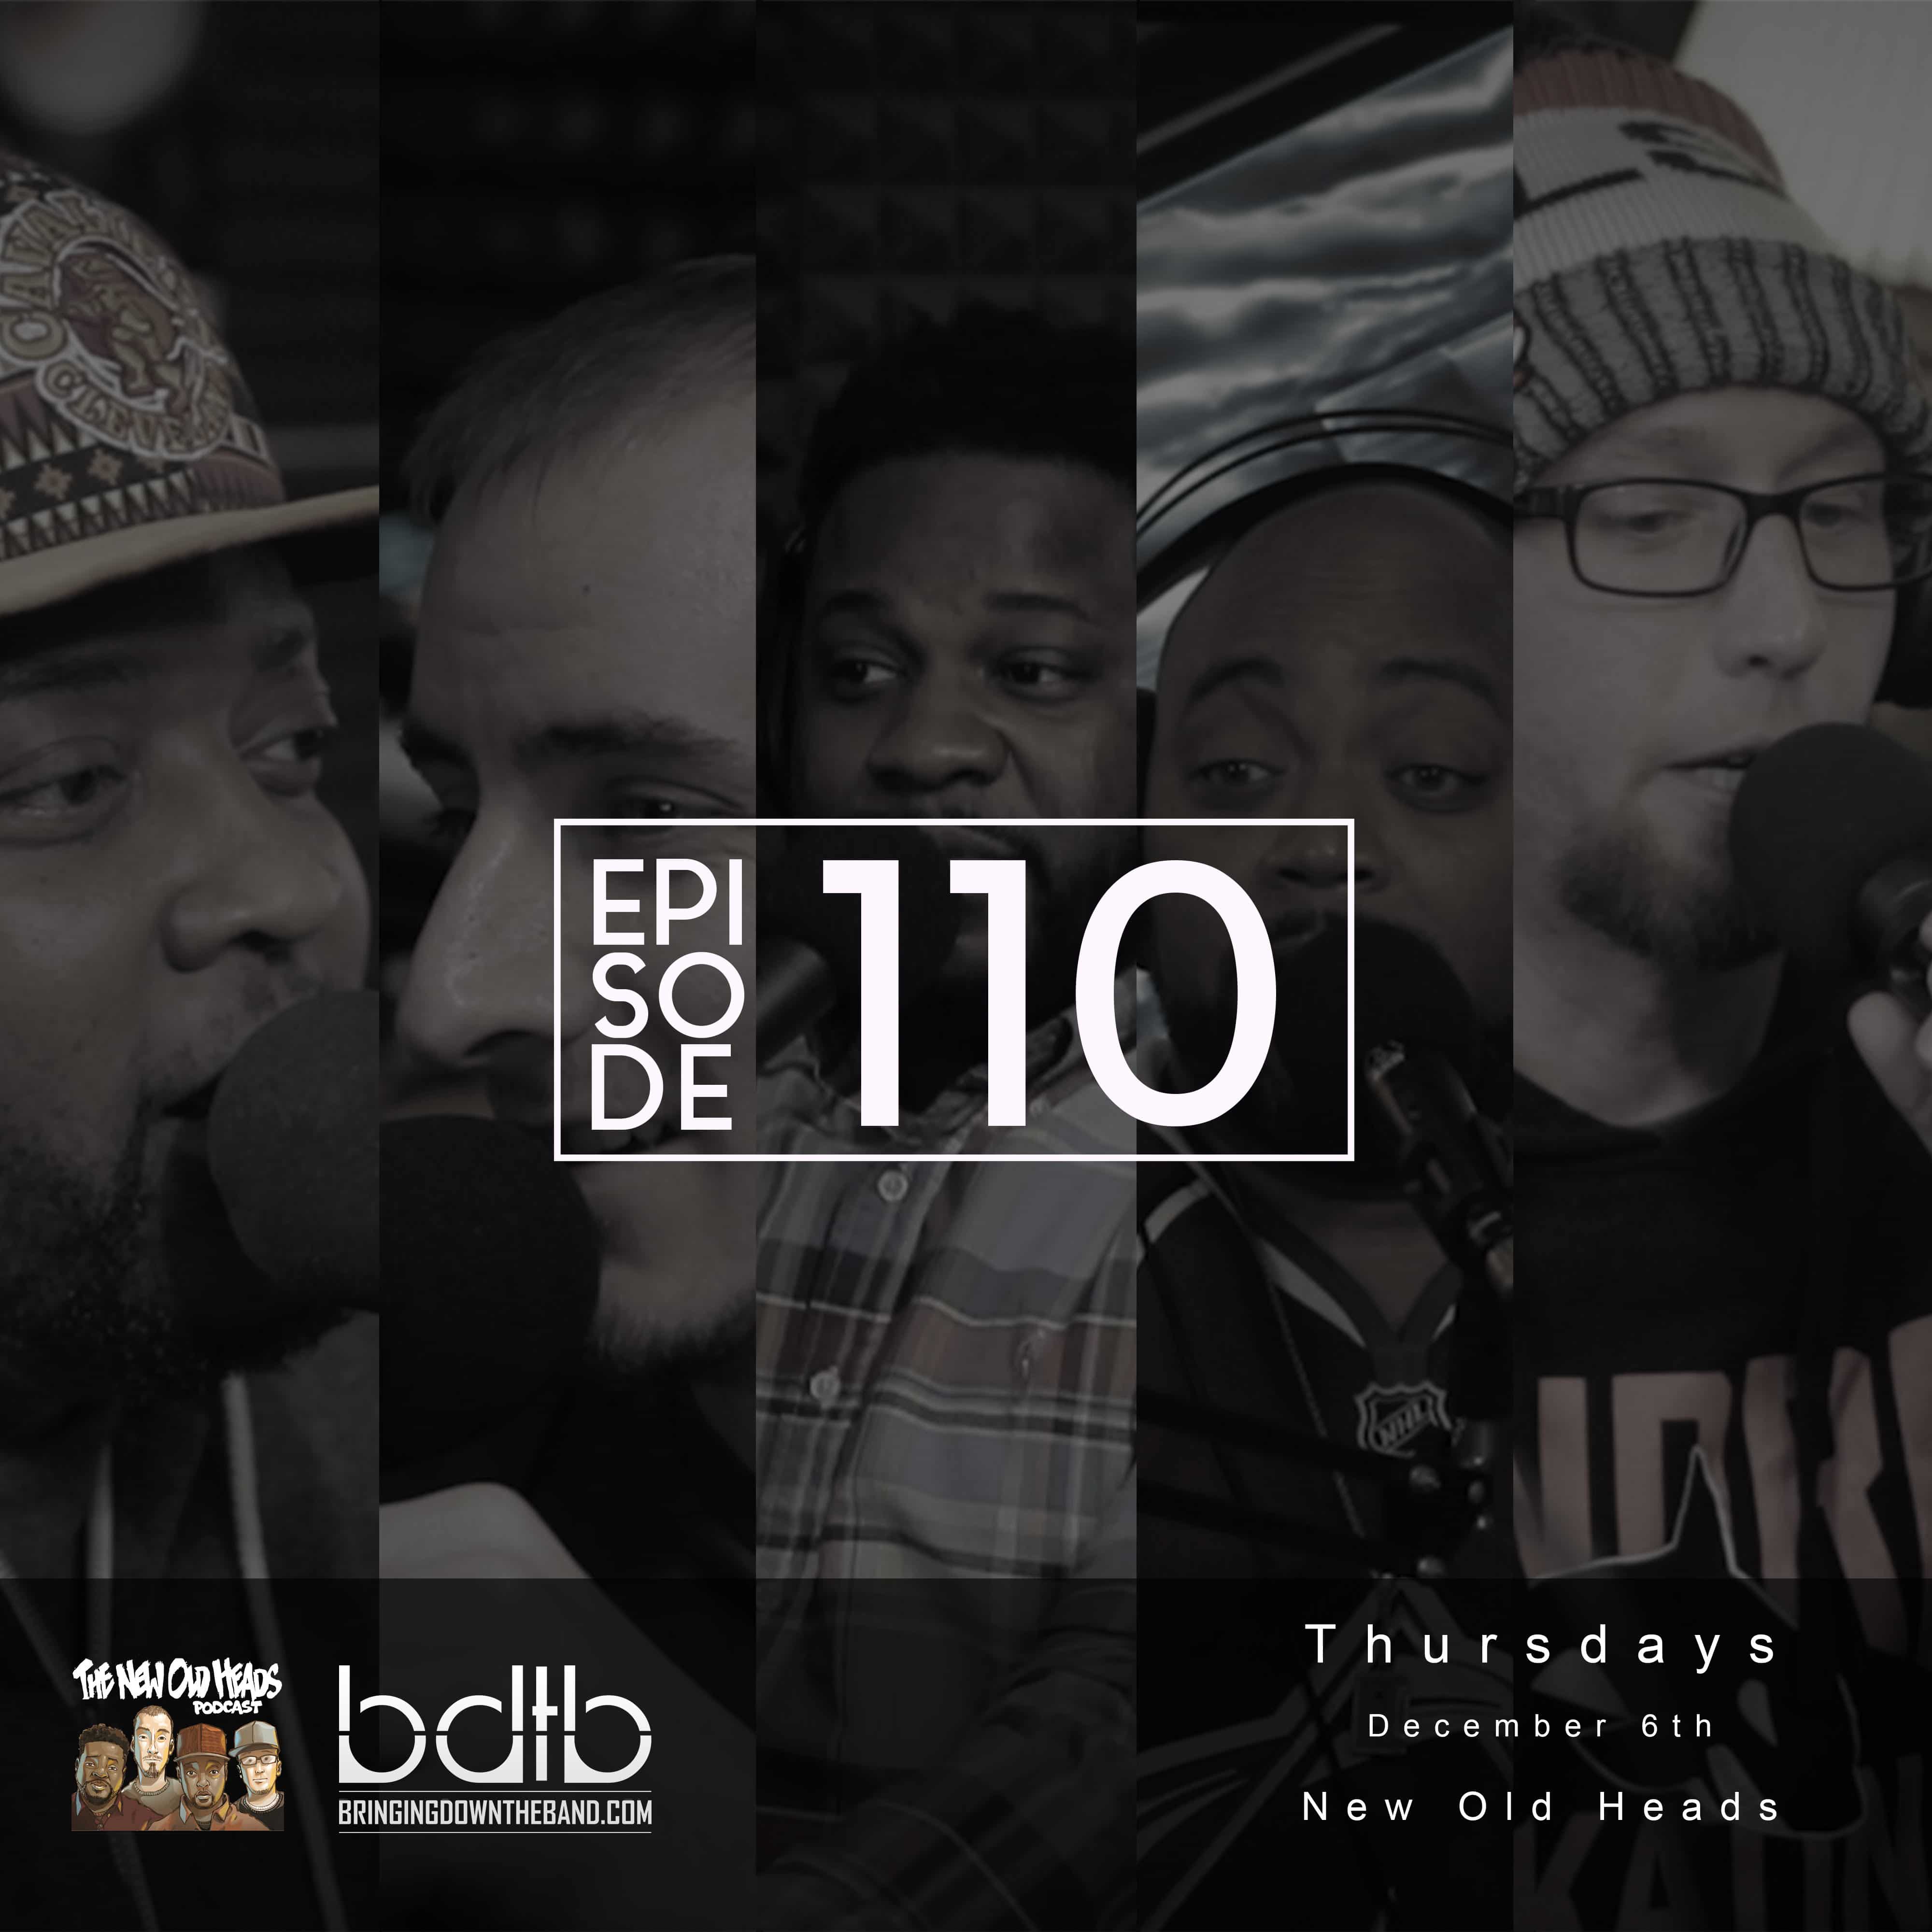 New Old Heads, Episode 110 (12/6/18) | "Hip hop's been a fad since it became pop culture." | George HW Bush Passes, Will.I.am's Hip Hop Comments, New Music & More